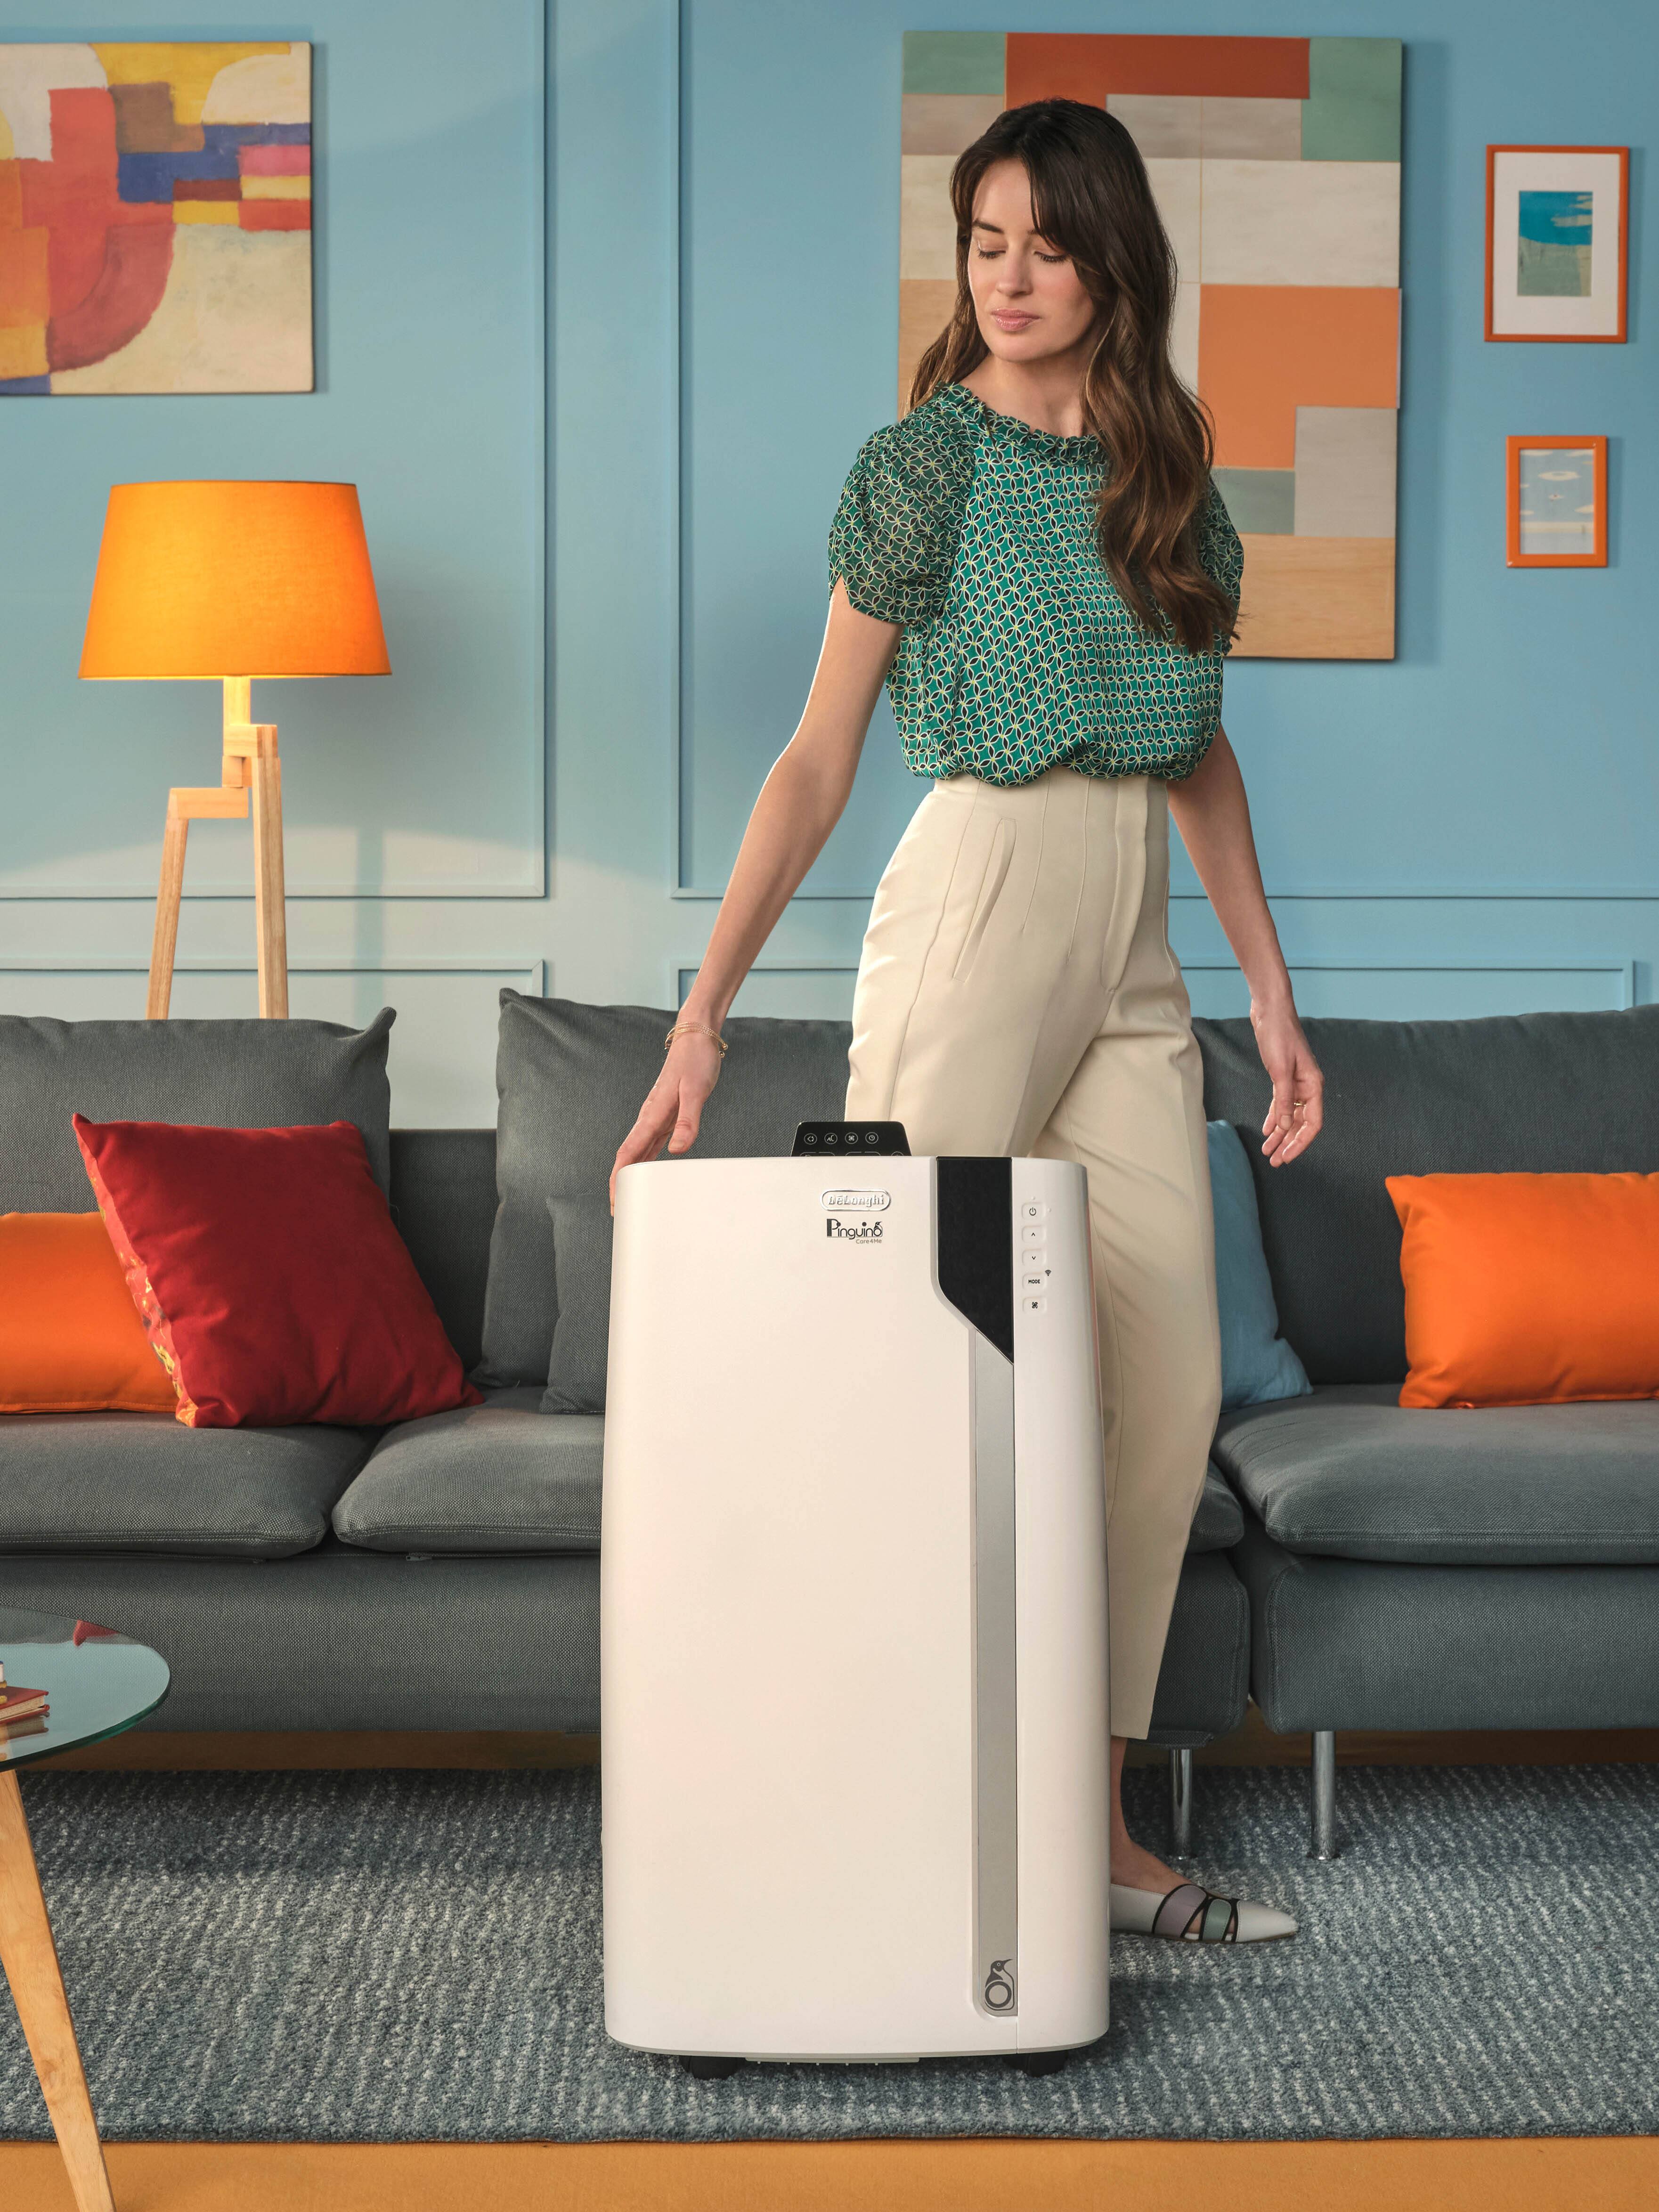 shop delonghi portable air conditioners and get ready for summer